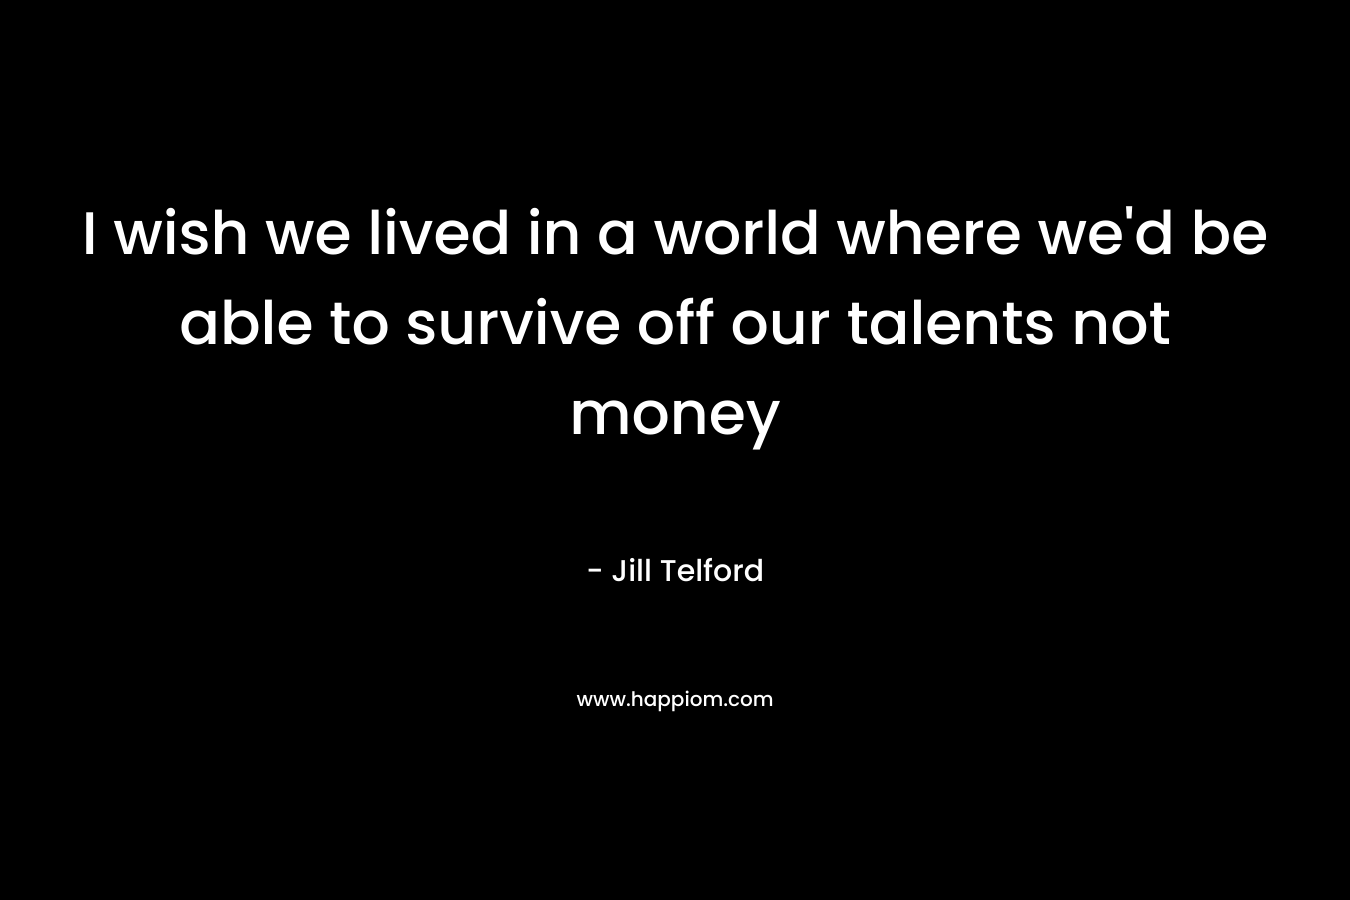 I wish we lived in a world where we'd be able to survive off our talents not money